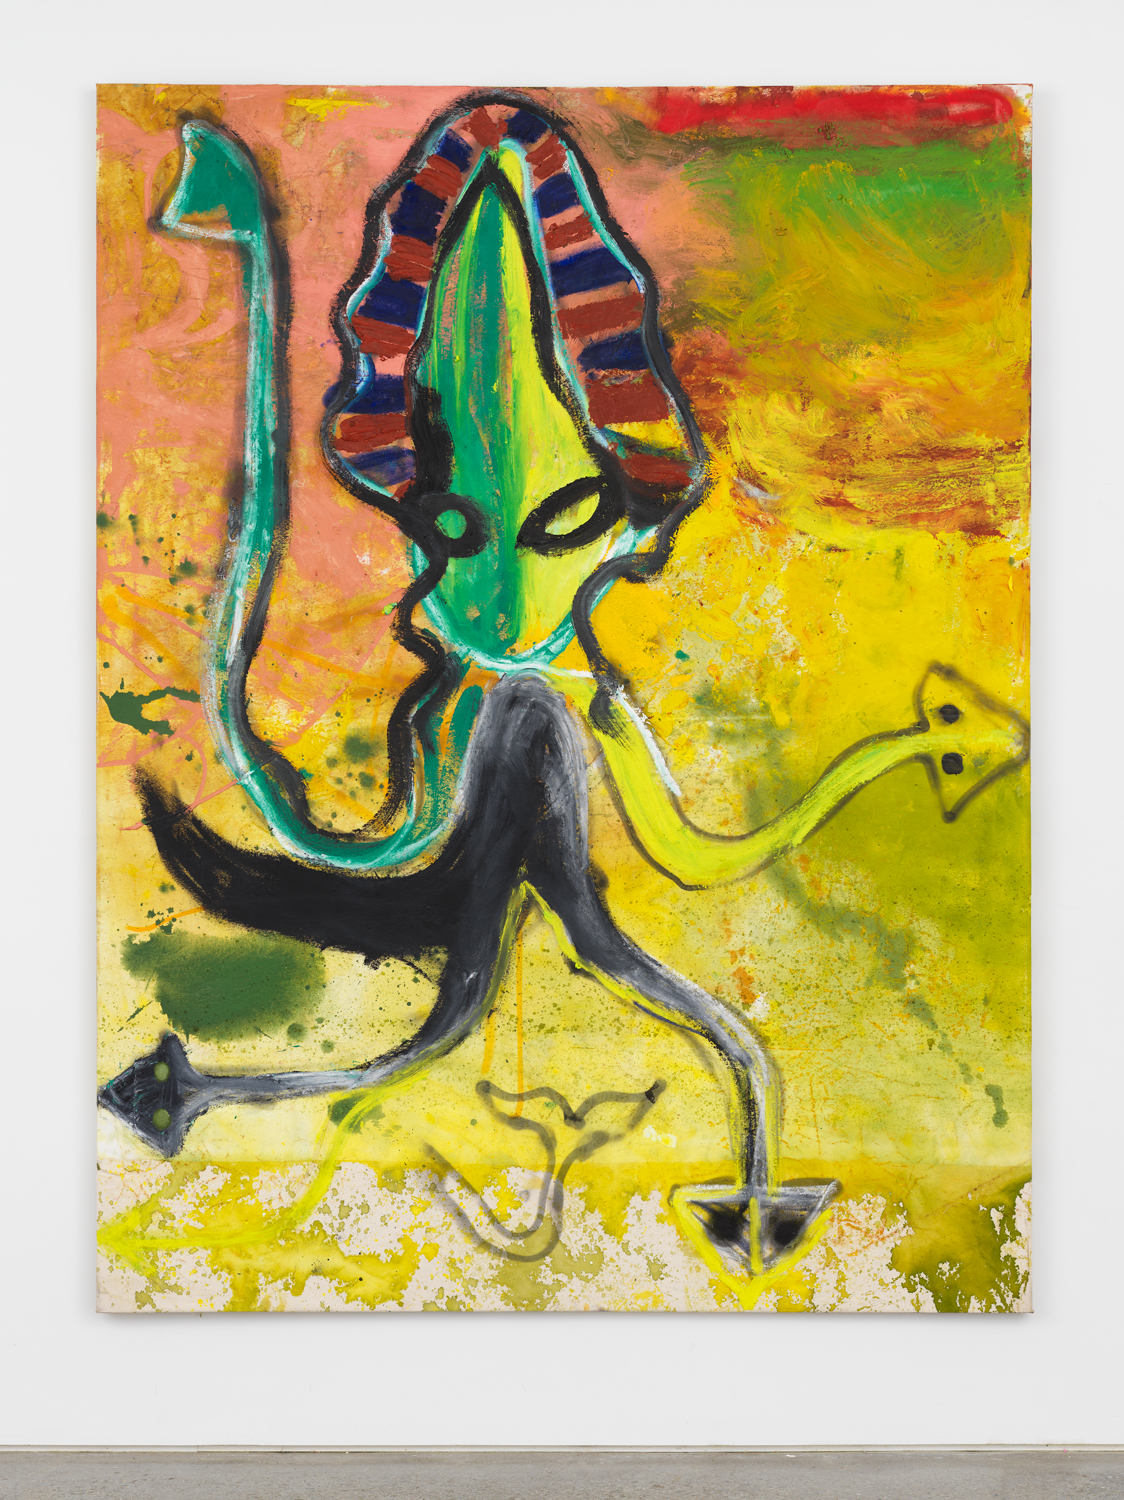 Bill Saylor, Fly To The Tide, 2019, Oil, spray paint, and Flashe on canvas, 84h x 64w in.